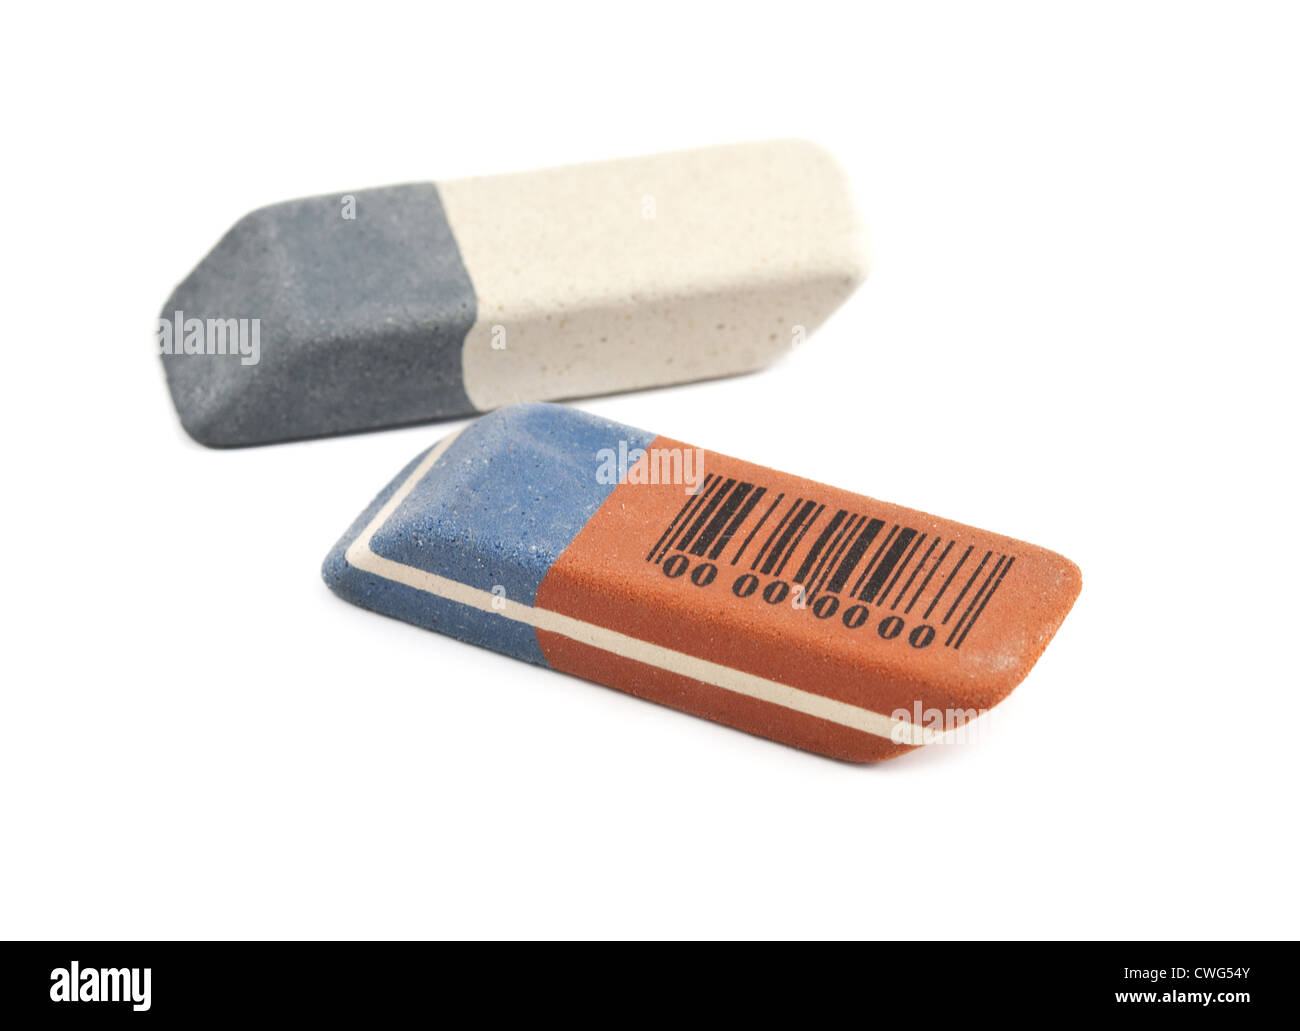 erasers is isolated on a white background Stock Photo